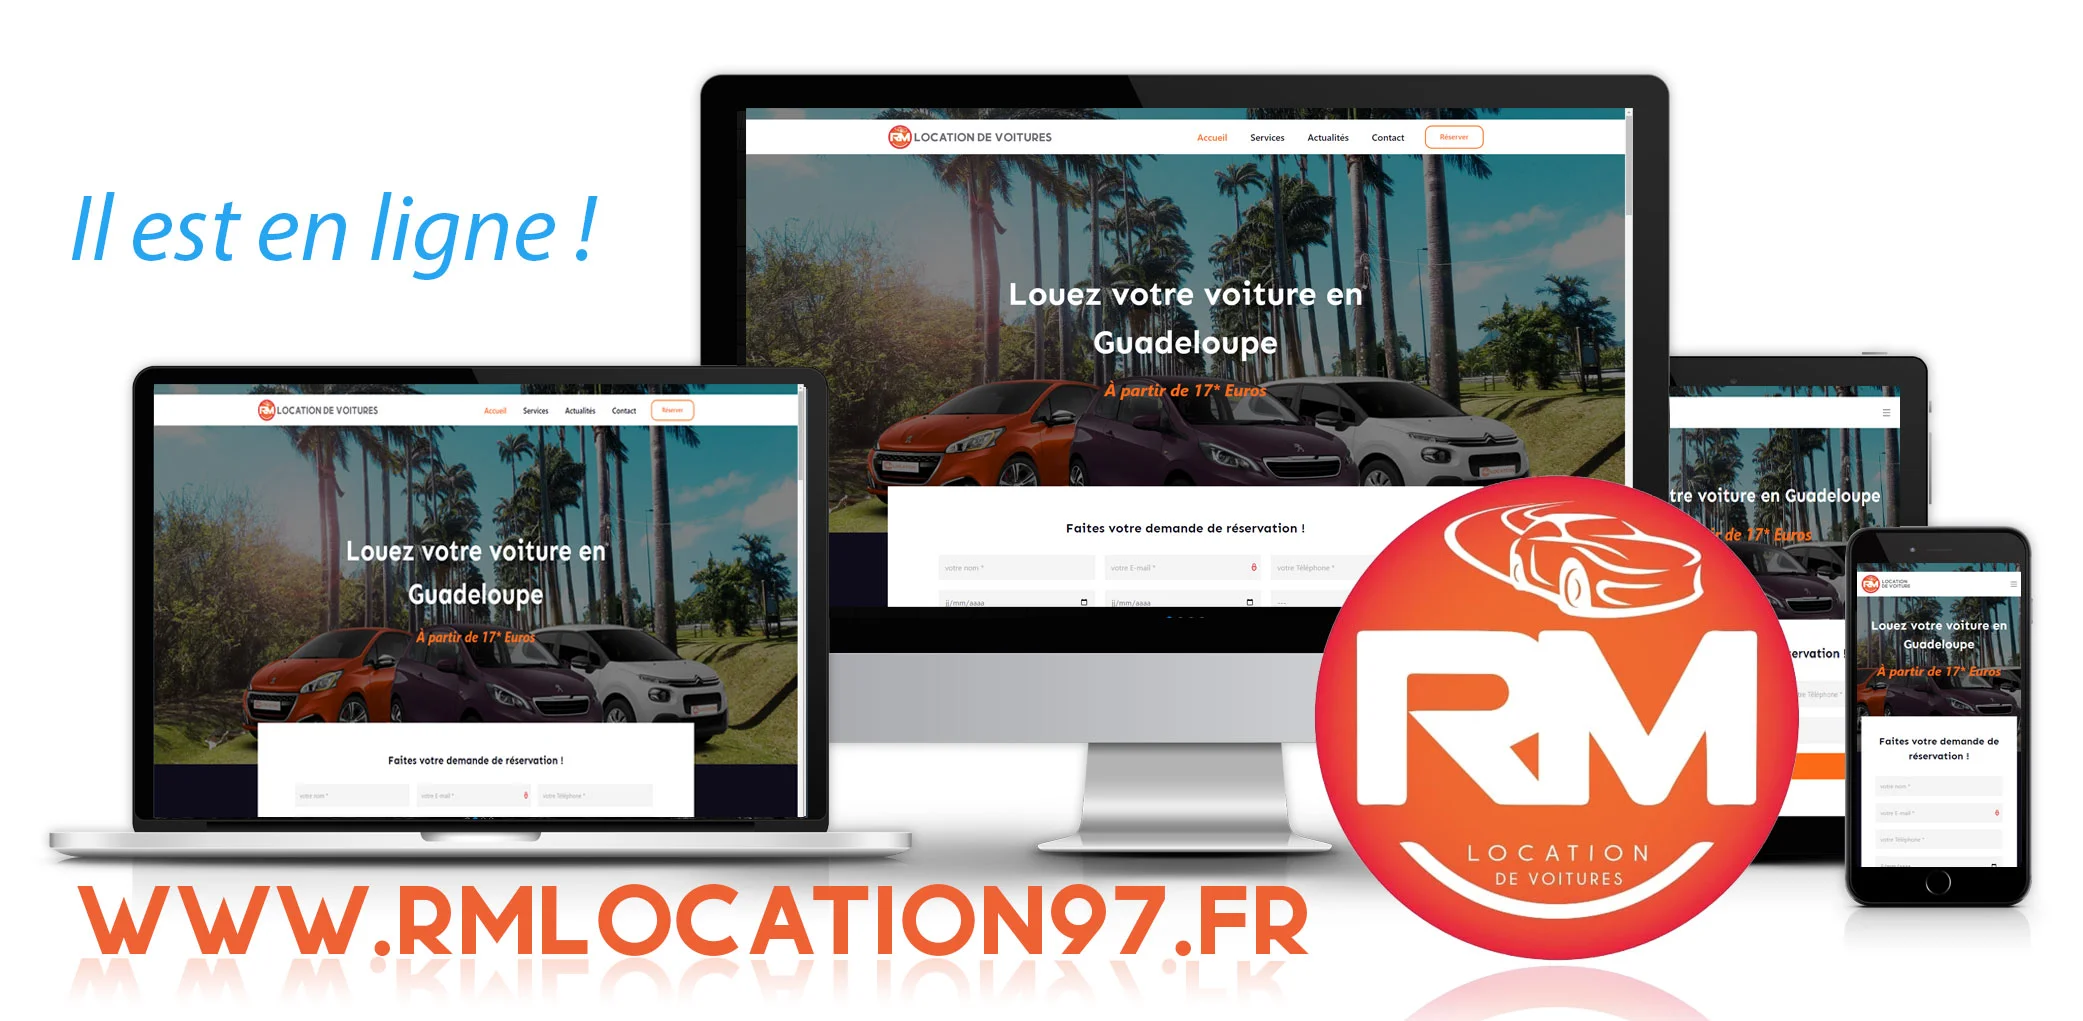 rm location97.fr voiture guadeloupe